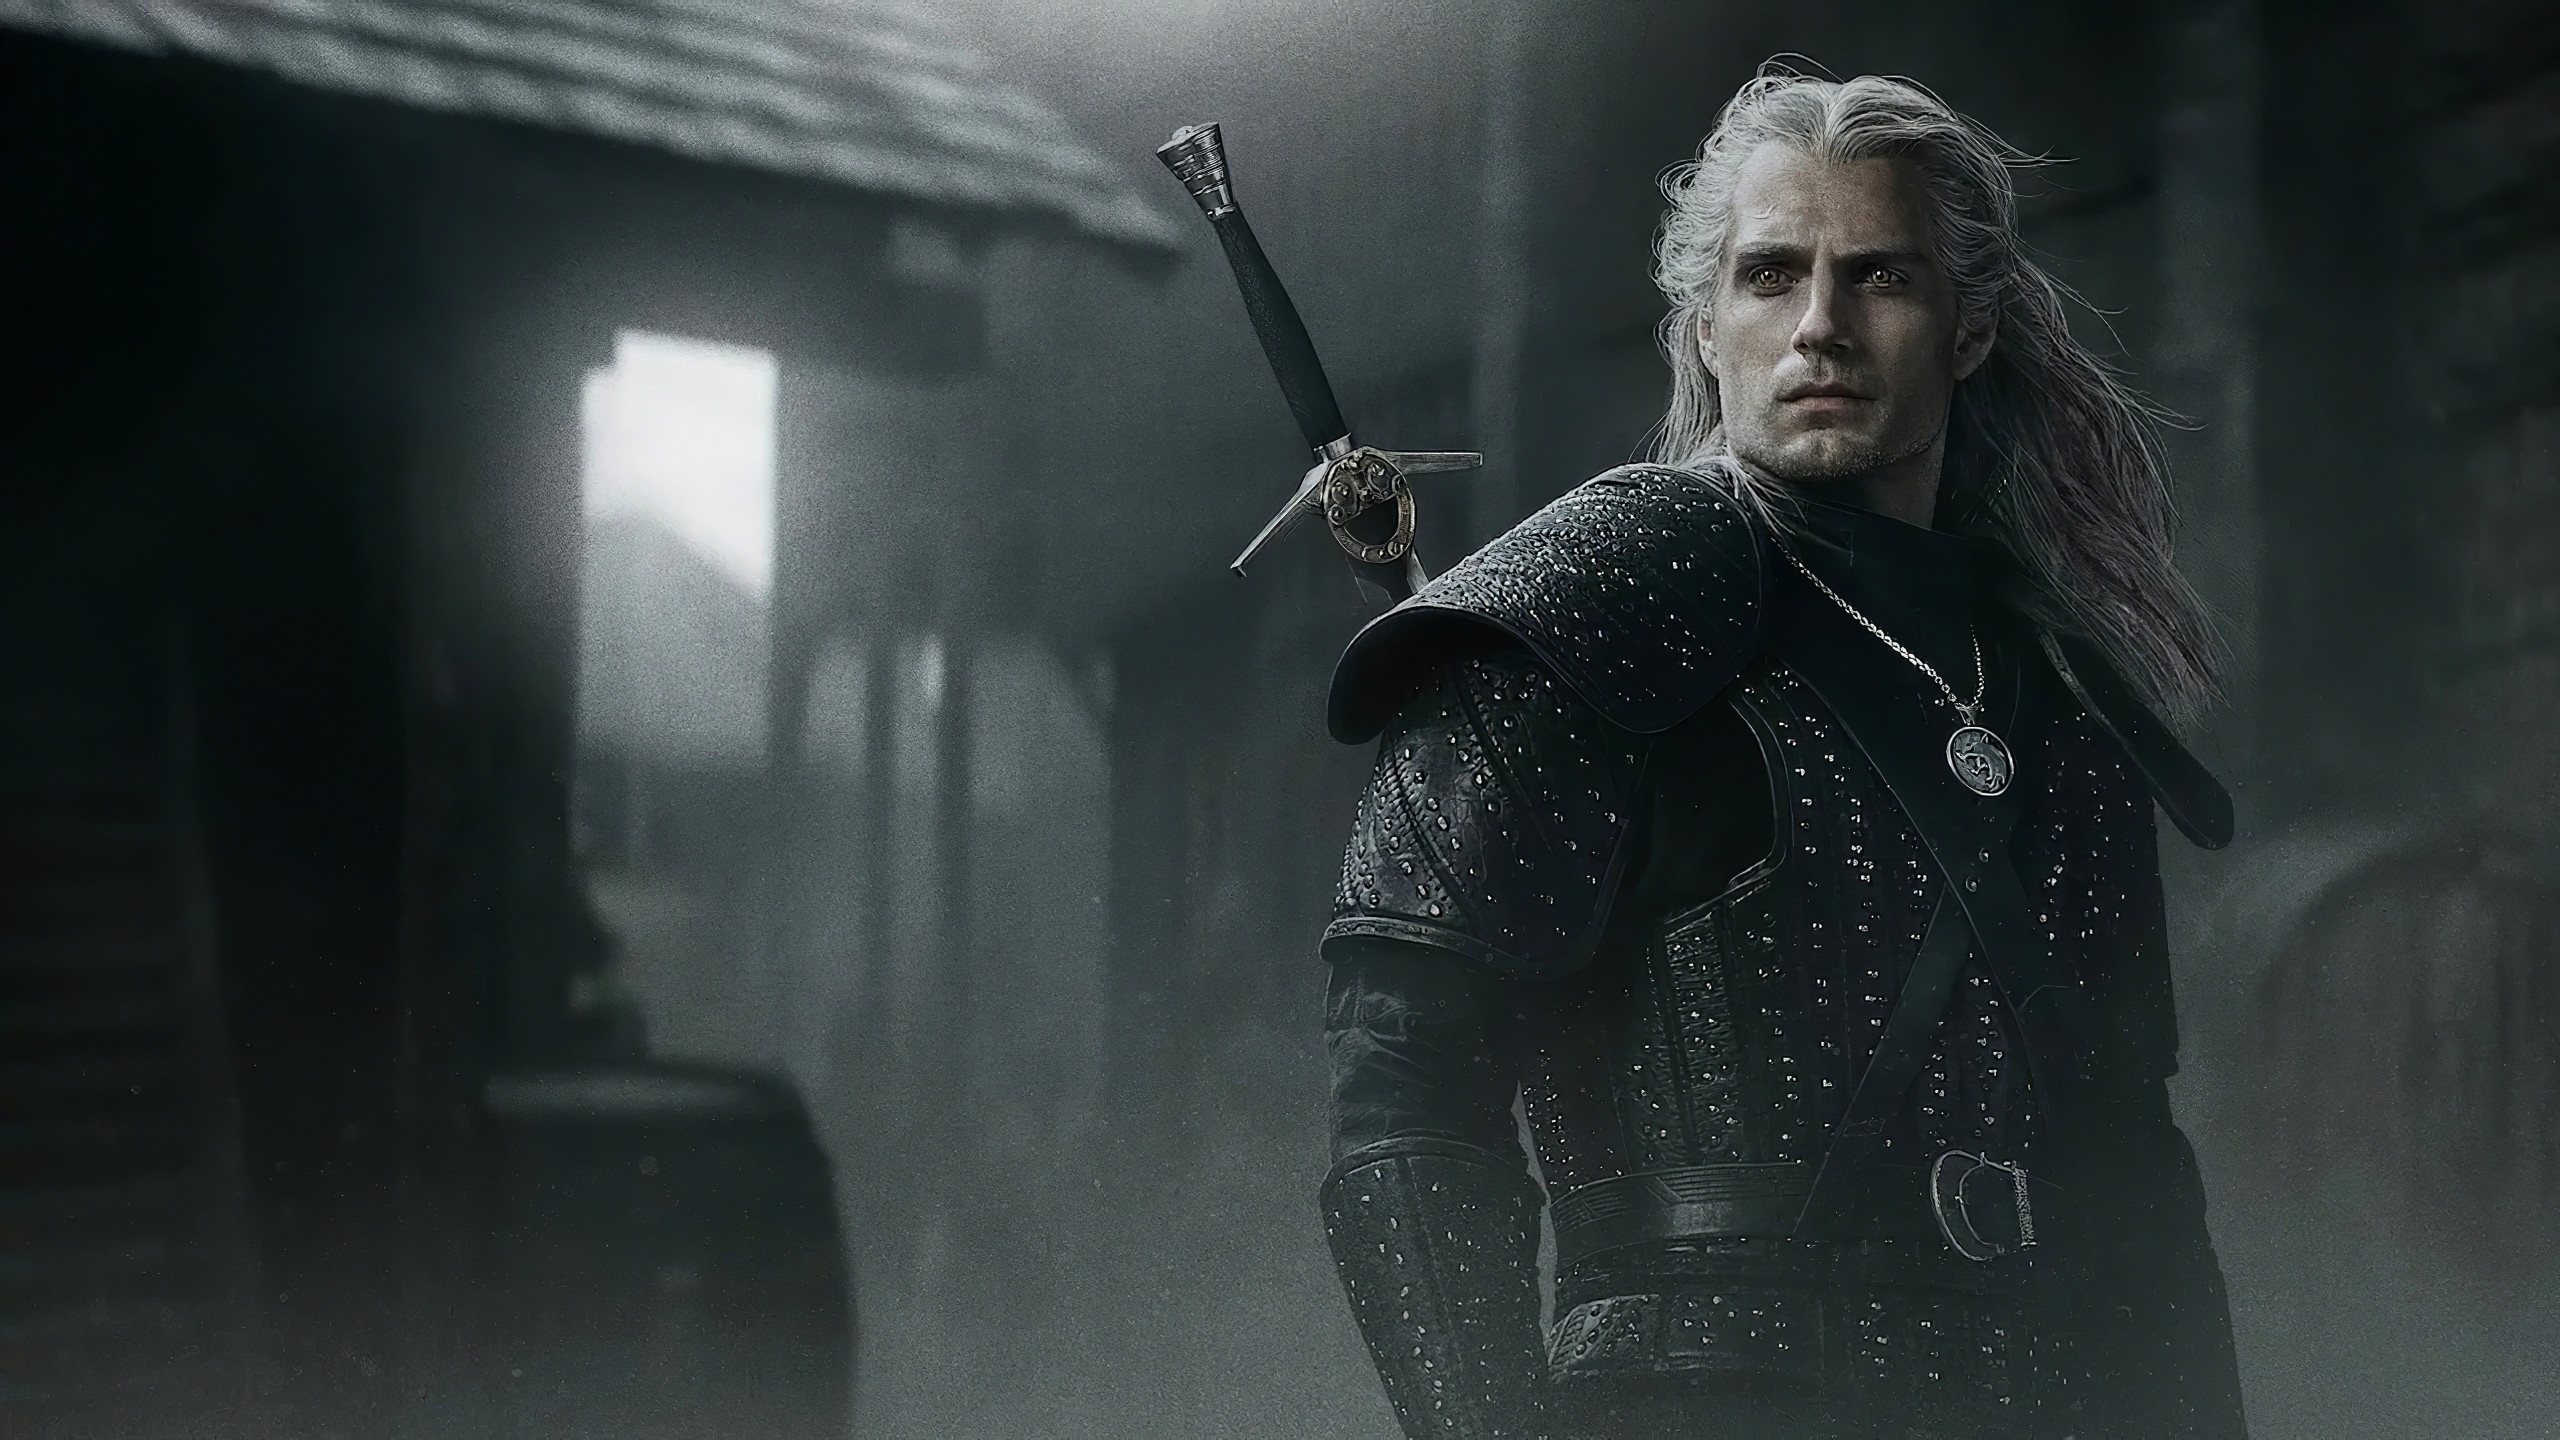 Wallpaper The Witcher, poster, Henry Cavill, 5K, Movies #22520